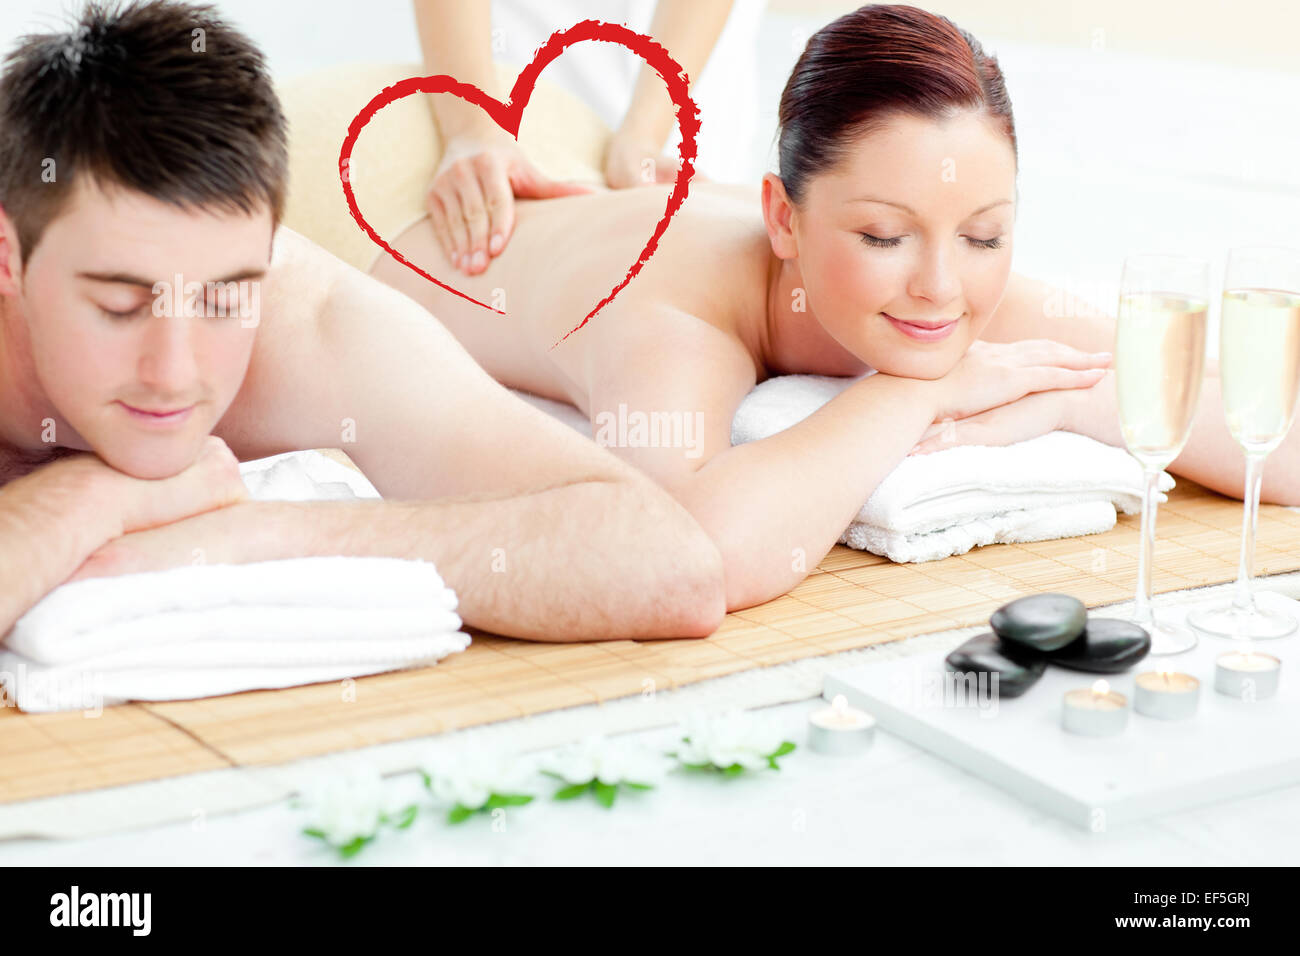 Composite image of charming young couple enjoying a back massage Stock Photo